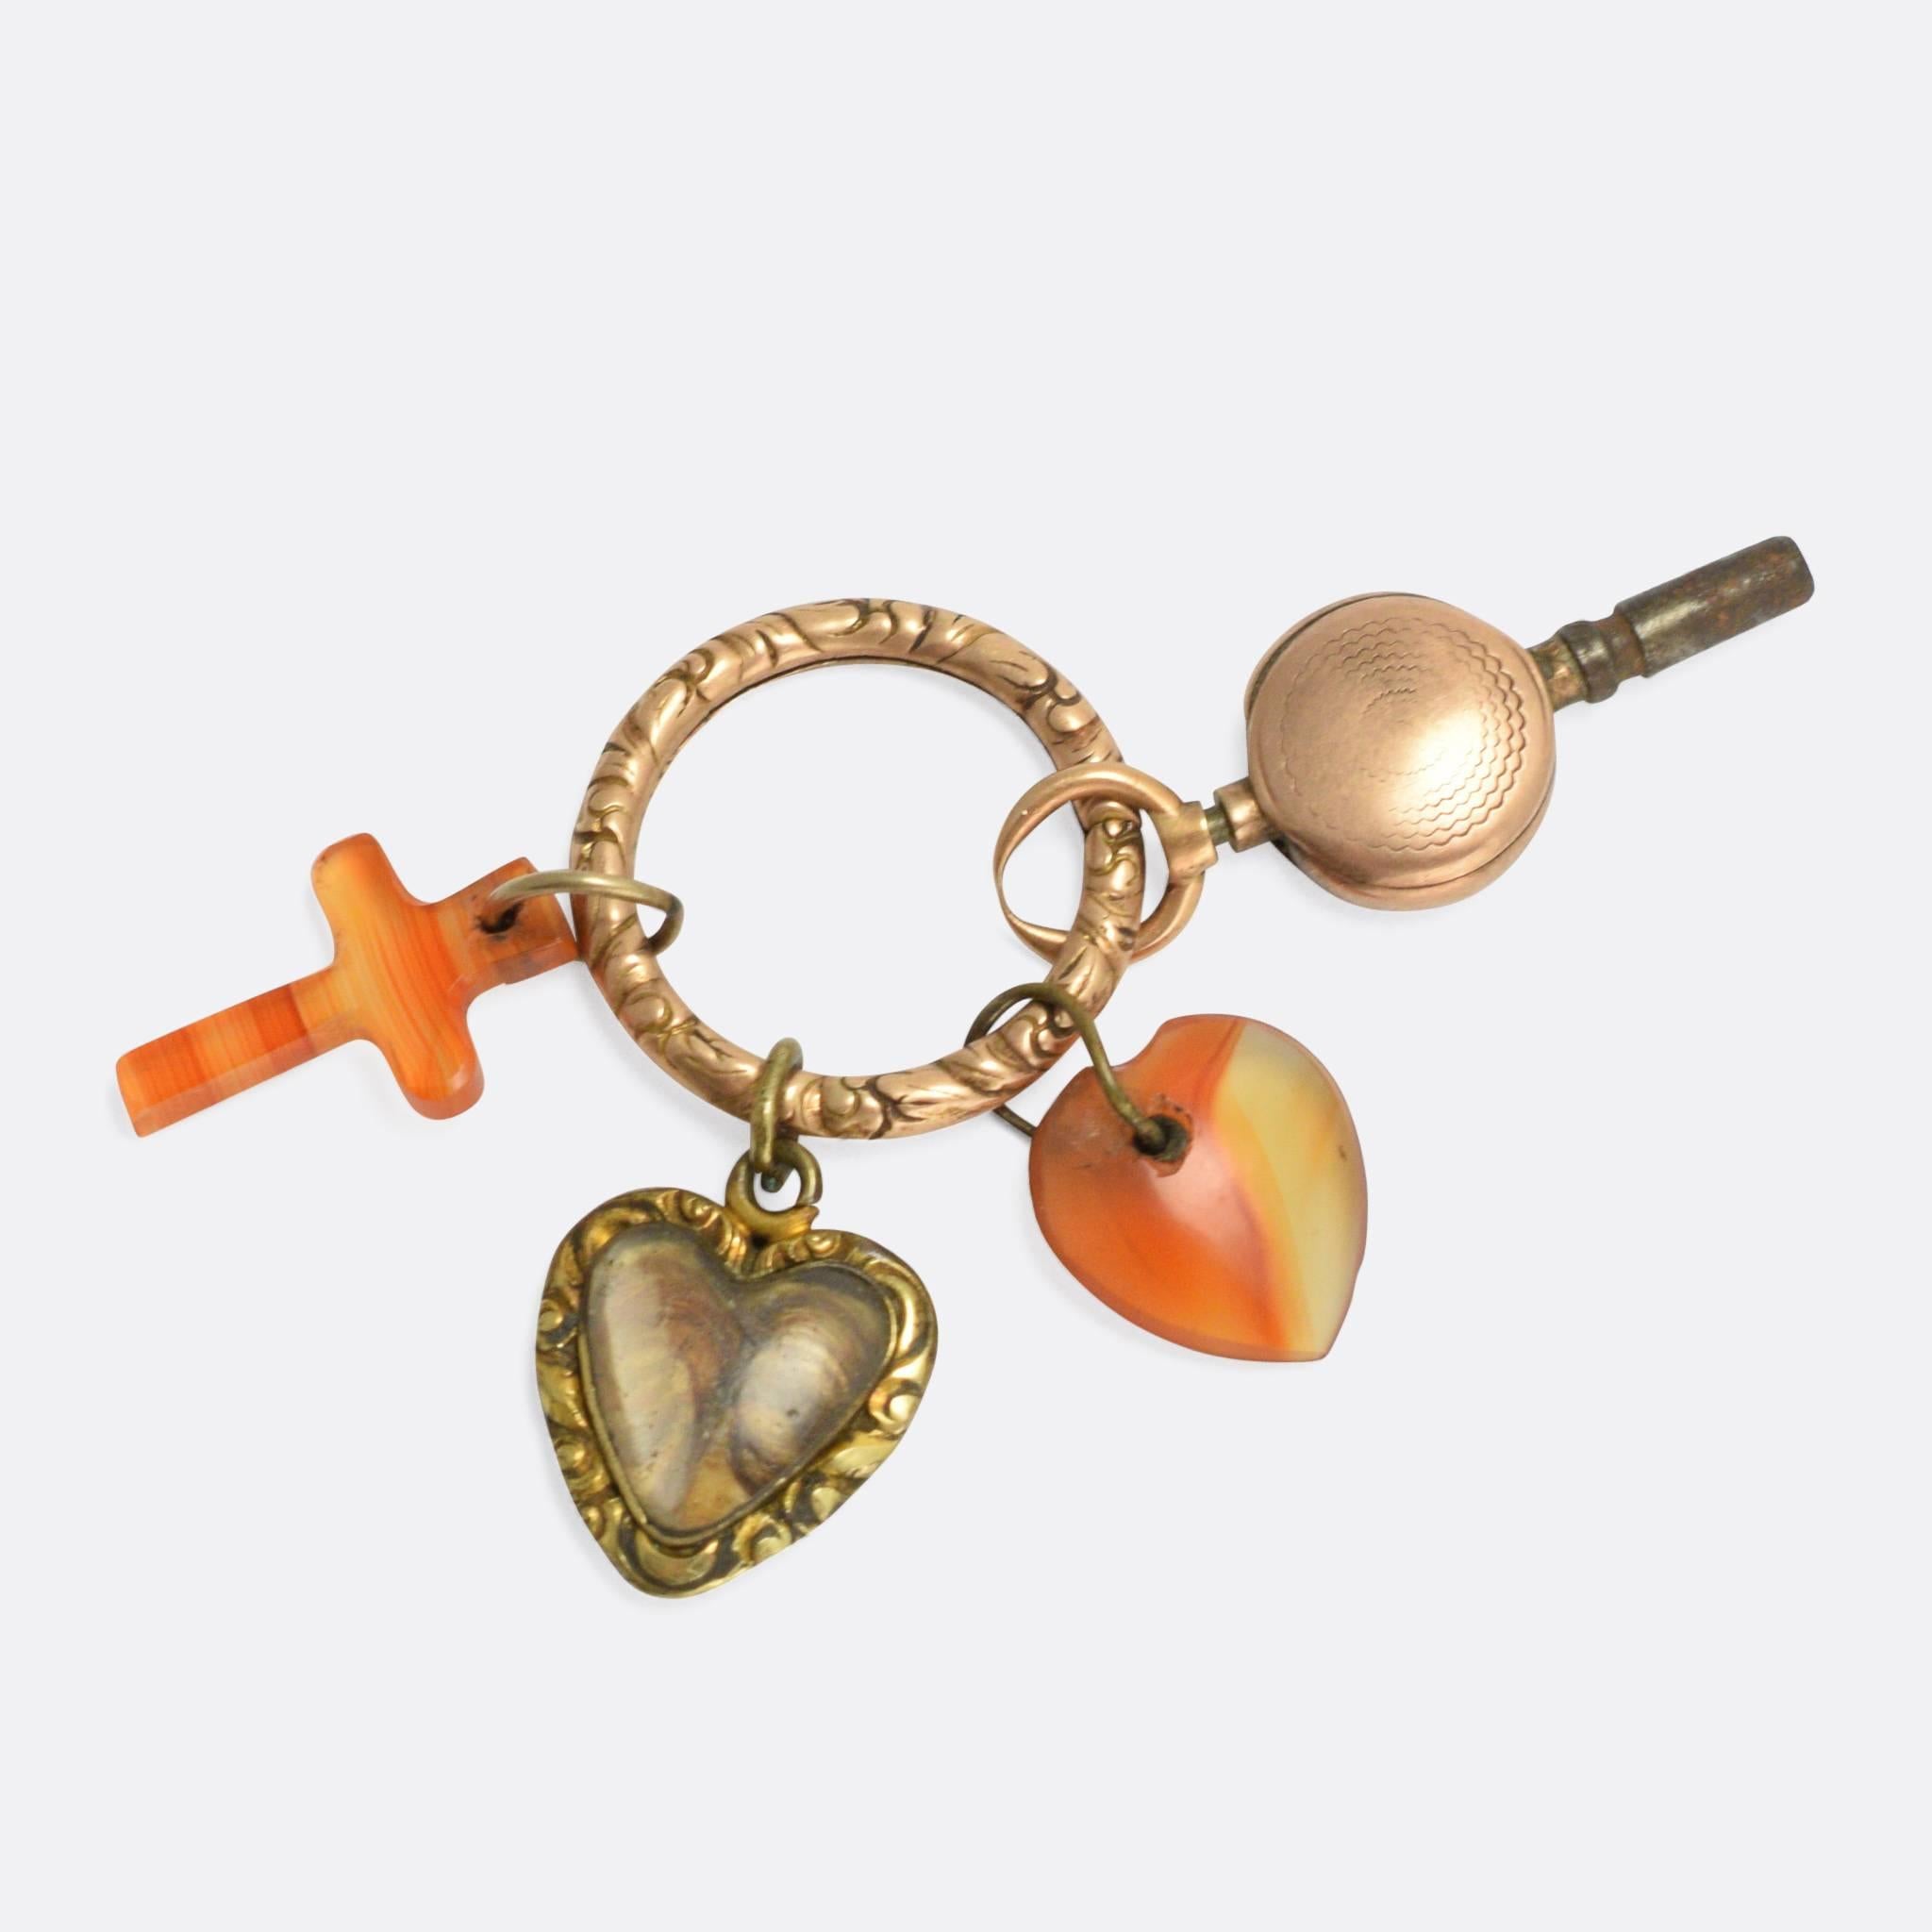 An ornate Georgian split ring, modelled in 15k gold and pre-loaded with period charms. Present are a cross and heart carved from carnelian, a pocket watch key, and a chased heart locket. The split ring makes a perfect charm holder, ready for your